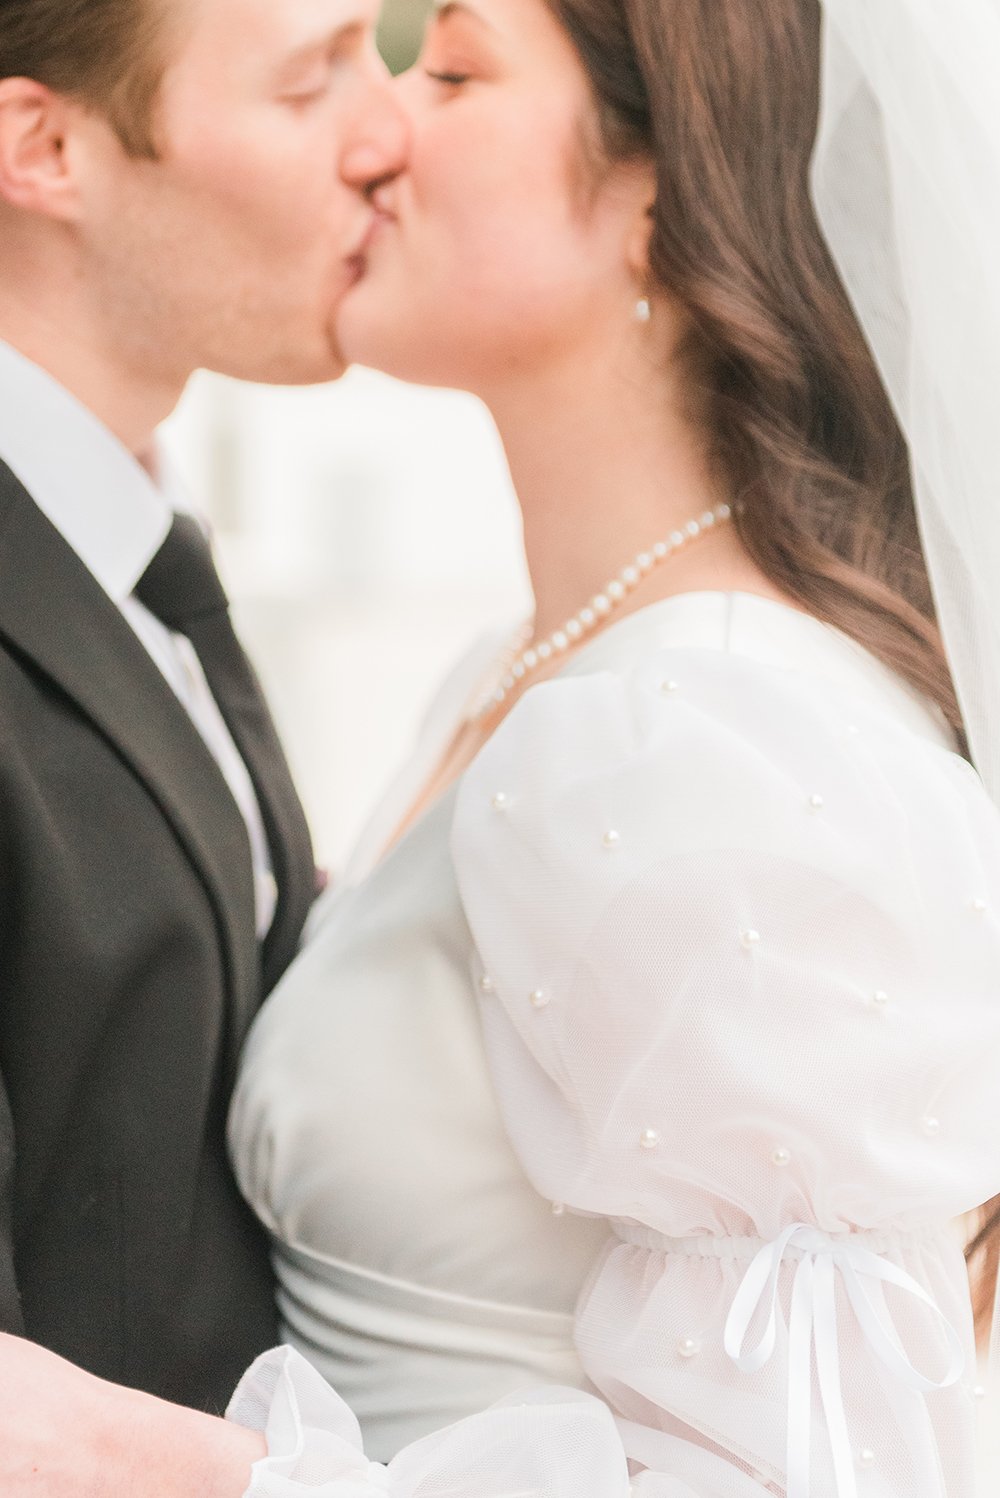  The focus of this wedding photo by Jacquie Erickson is the detail of the bride's dress, while the couple is out of focus kissing. Detail focus wedding picture modest wedding dress&nbsp; wedding photographer Senoia Newnan #weddingphotographer #ldswed